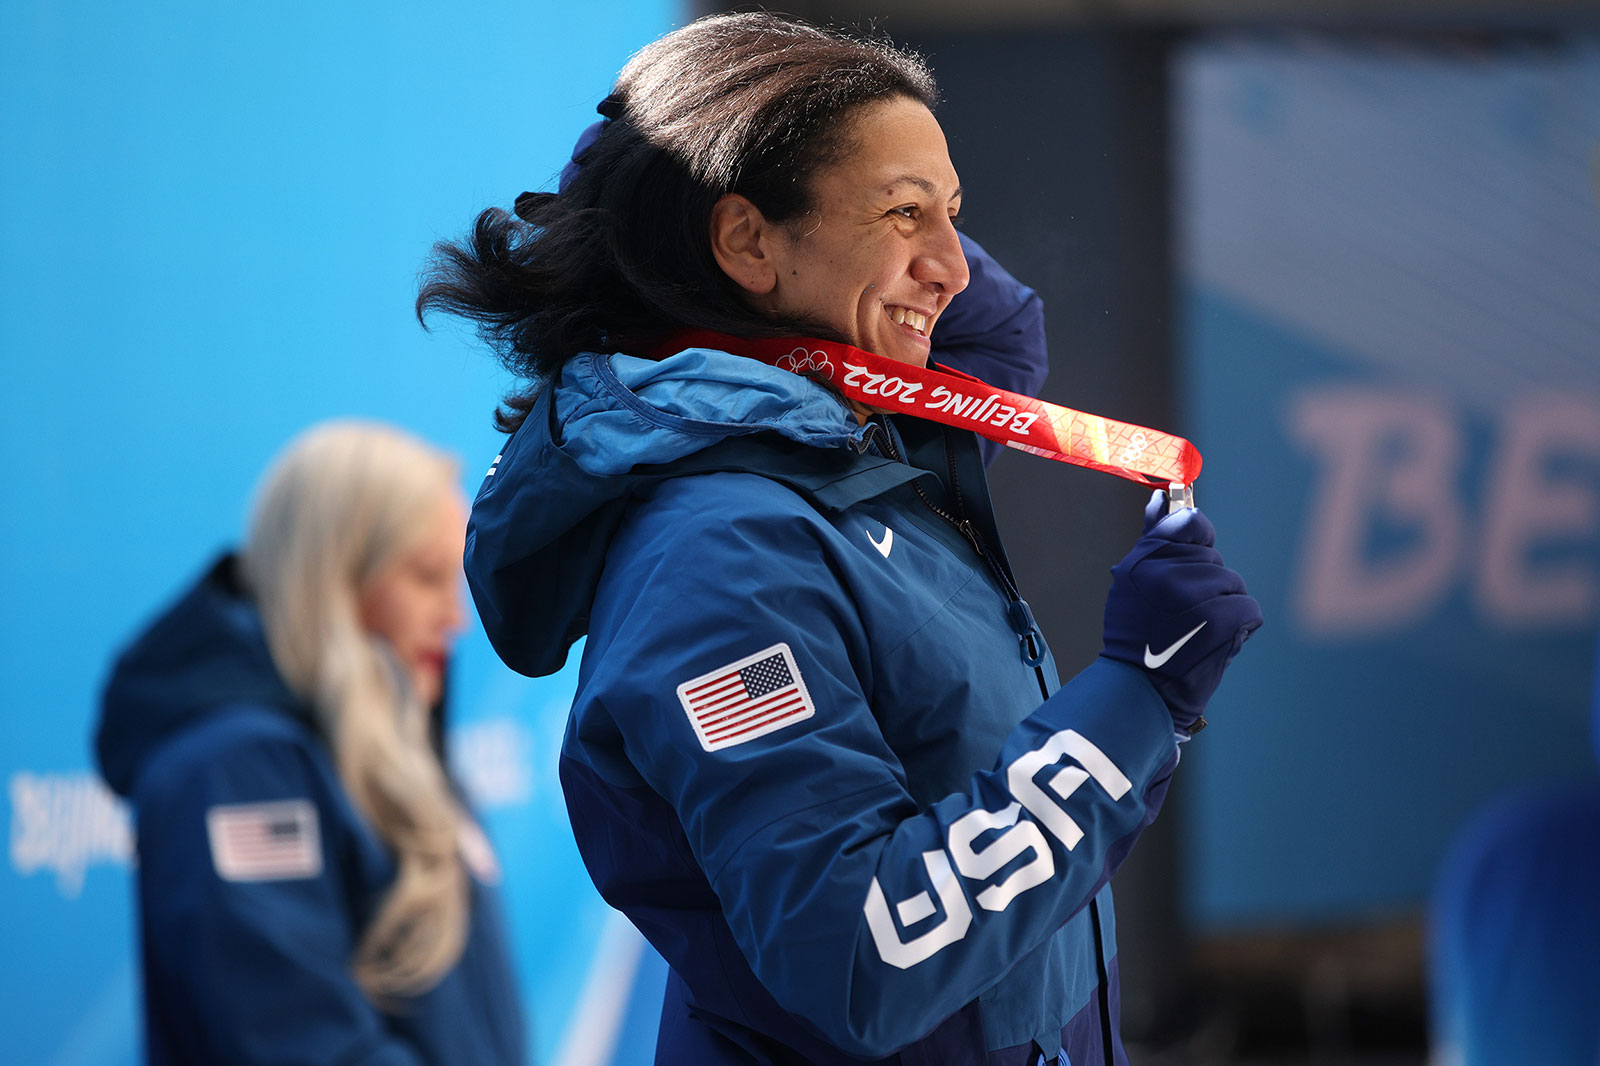 Elana Meyers Taylor accepts her silver medal during the medal ceremony for the women's monobob event on February 14.